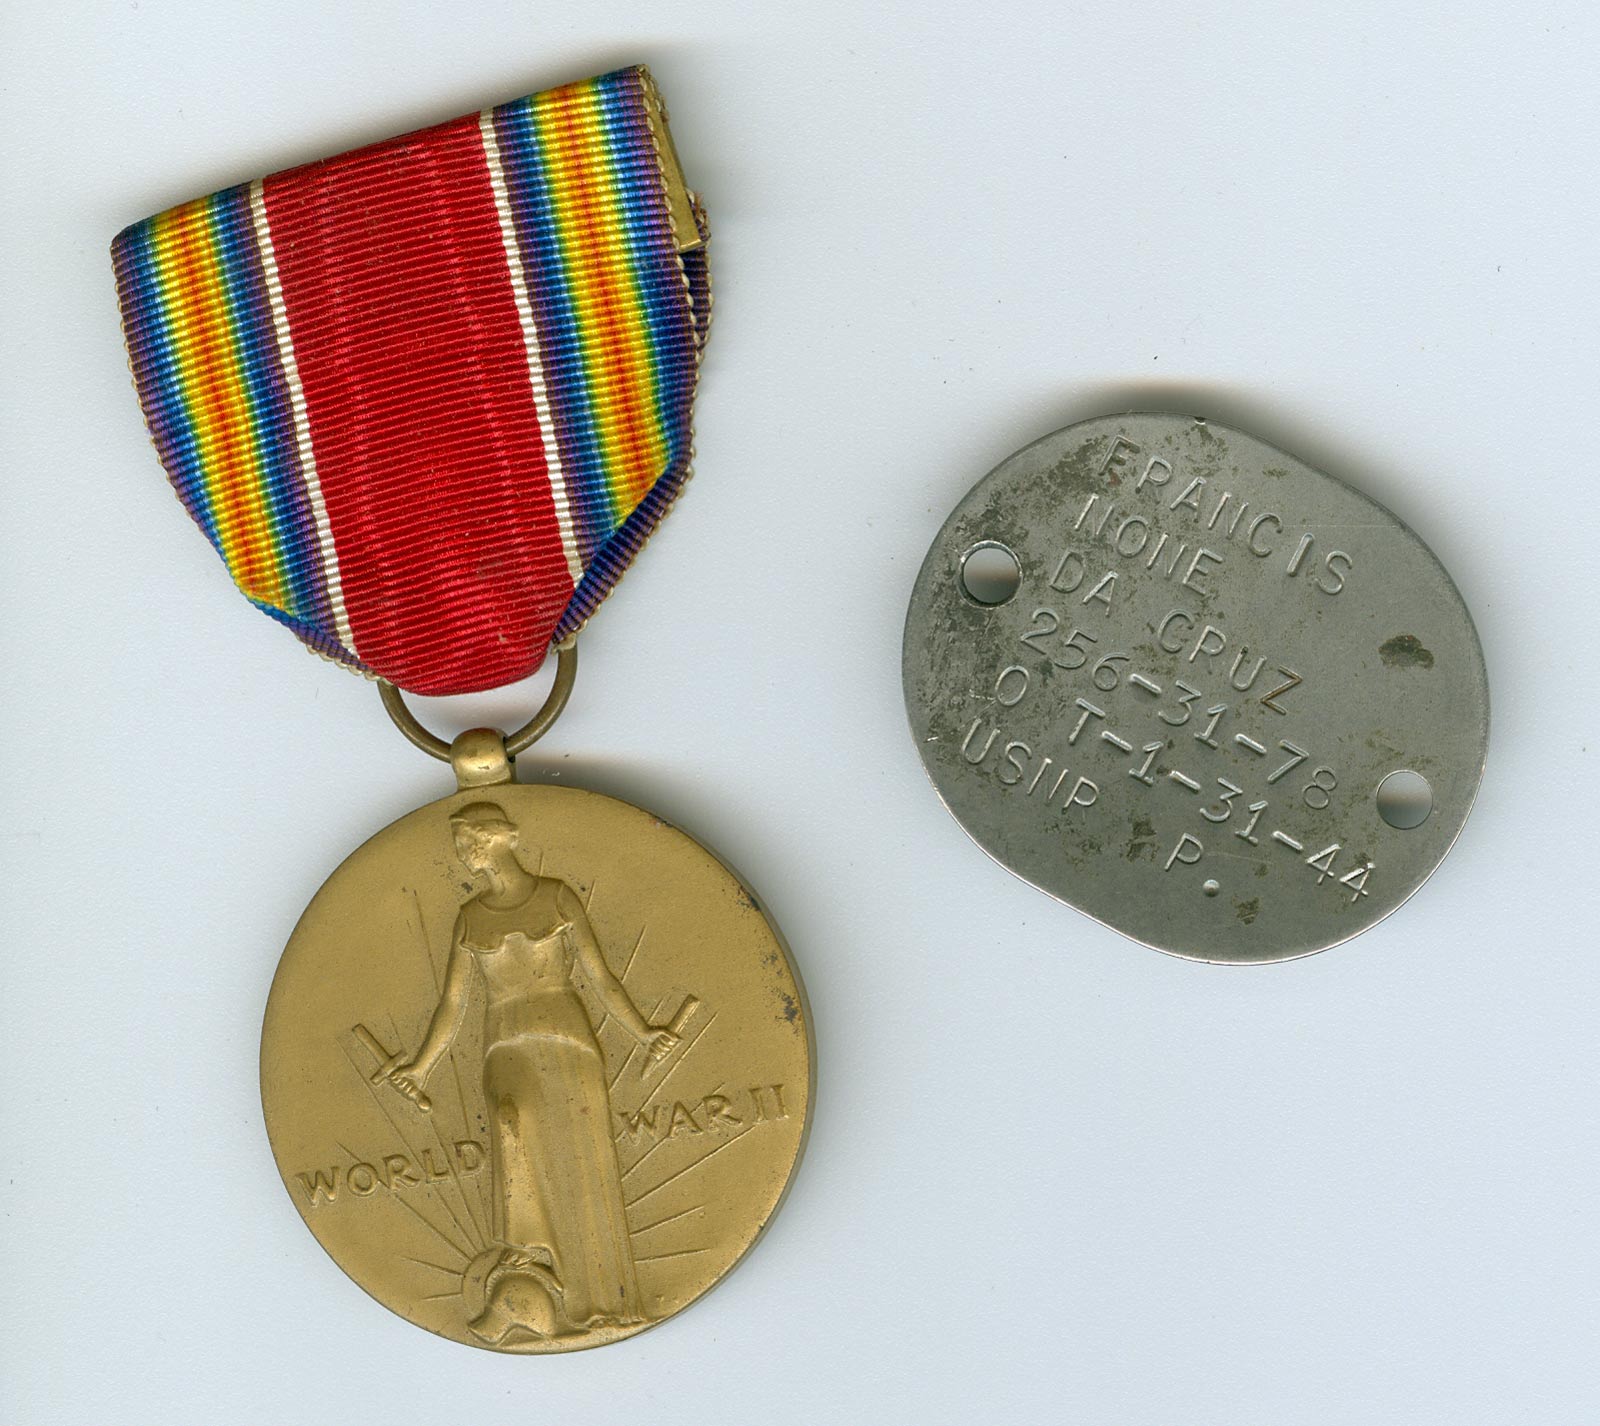 WWII medal and dogtag